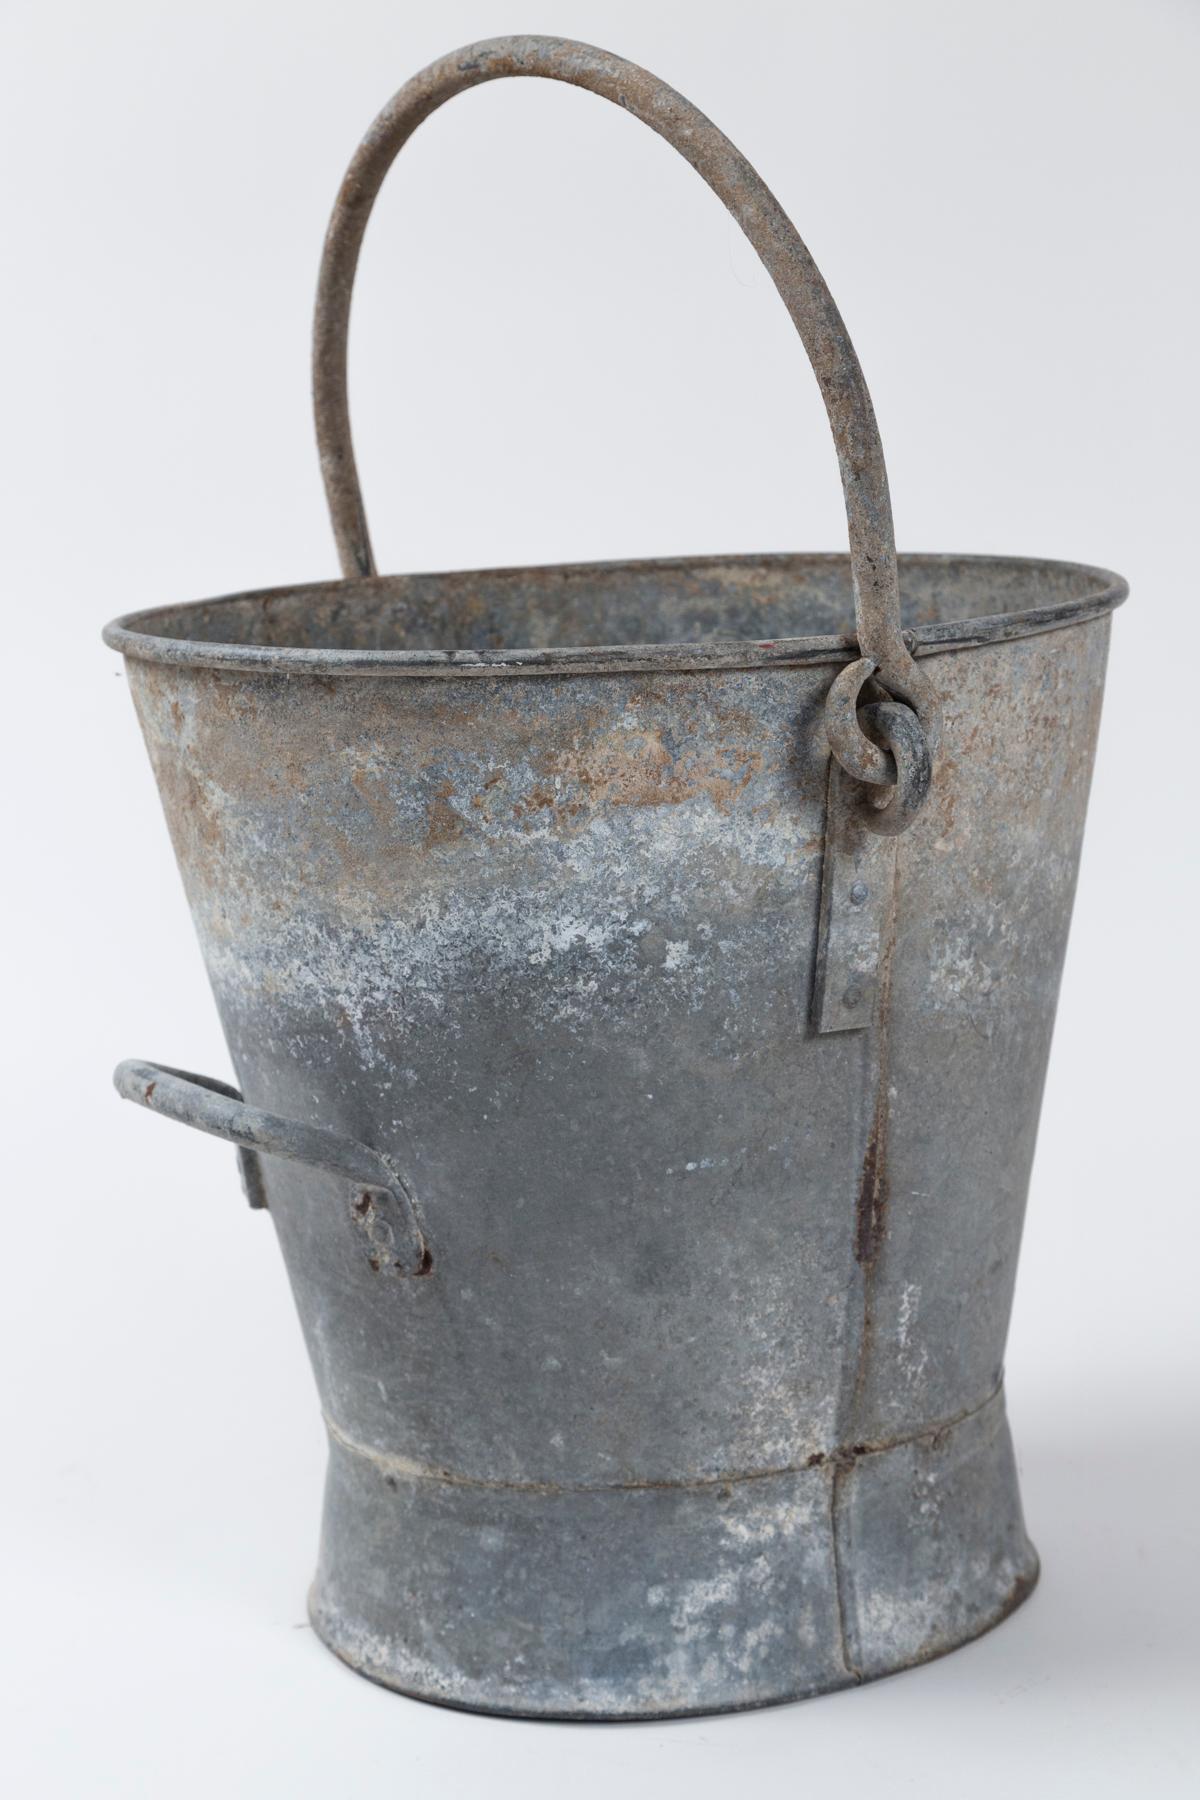 Antique French Zinc Milk Bucket, early 20th Century. Hand-crafted bucket with bale and fixed handles. Wonderful aged patina.